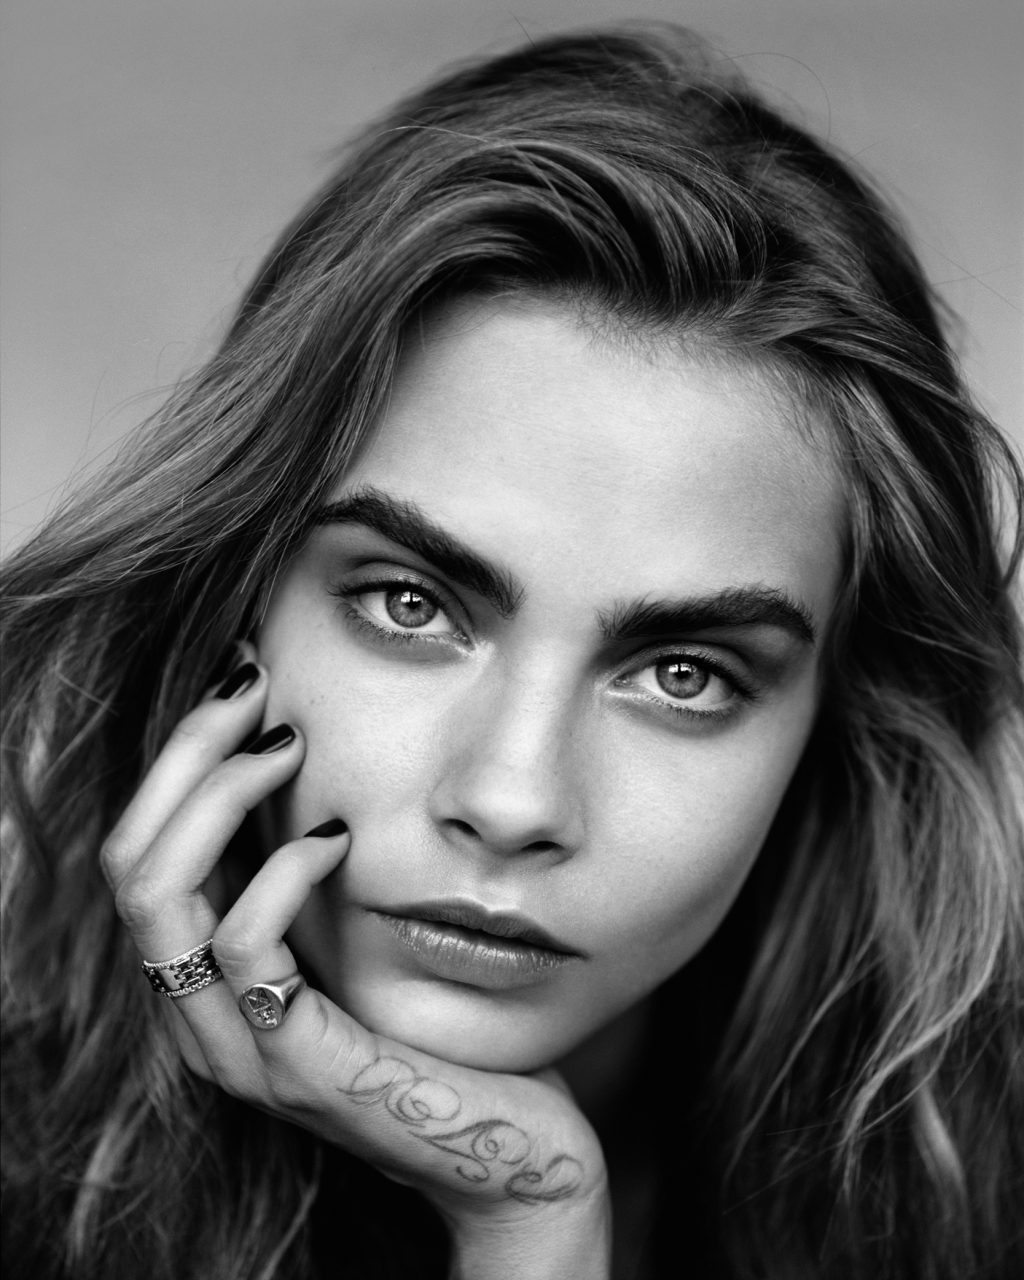 Cara Delevingne On Her New Initiative To Save The Planet